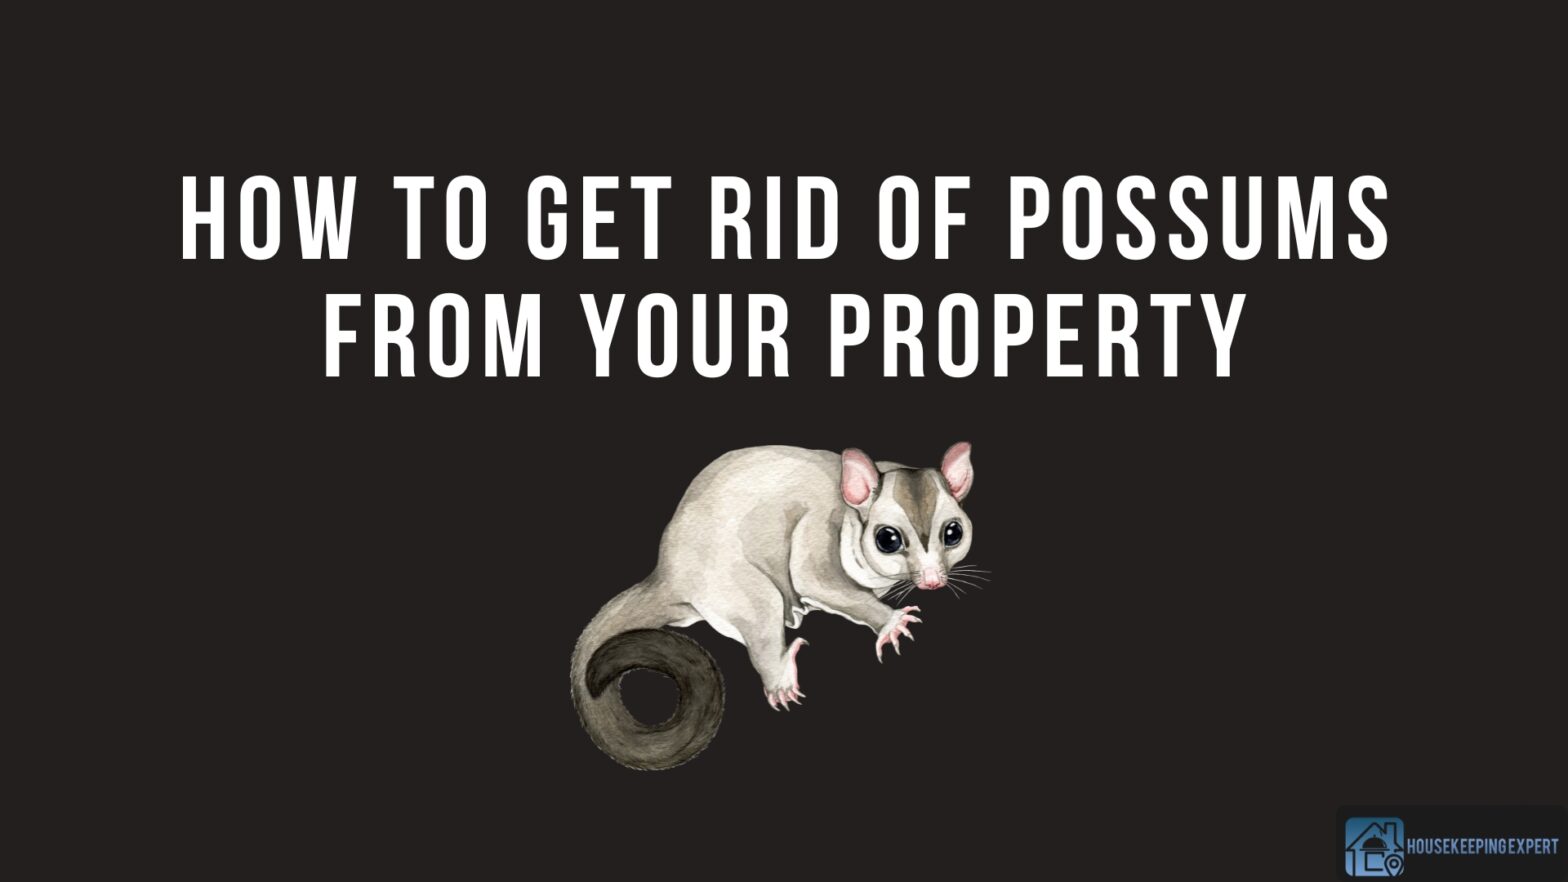 How To Get Rid Of Possums From Your Property